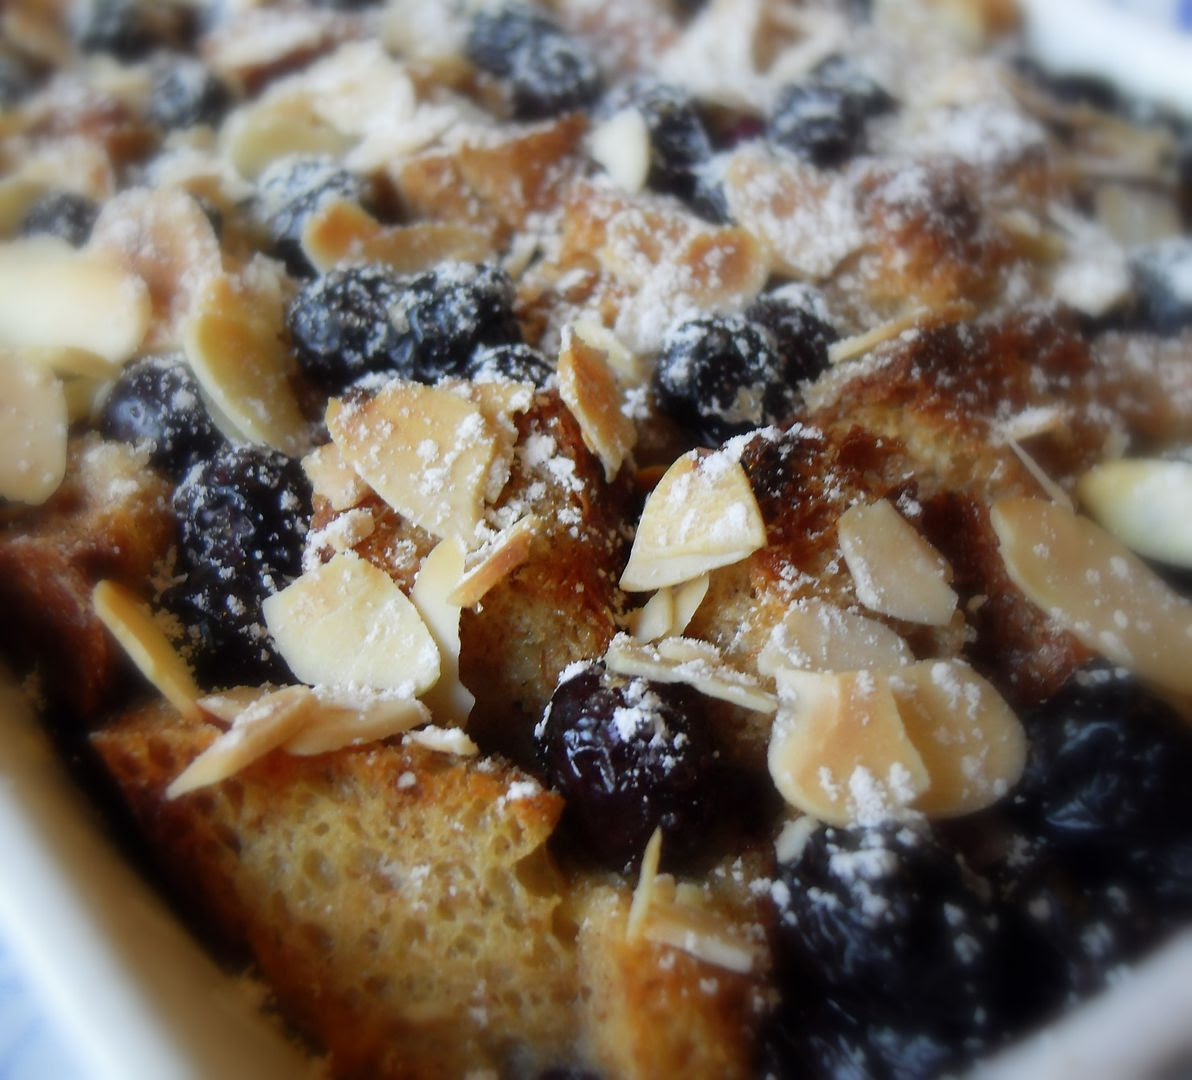 Blueberry and Almond Breakfast Bake